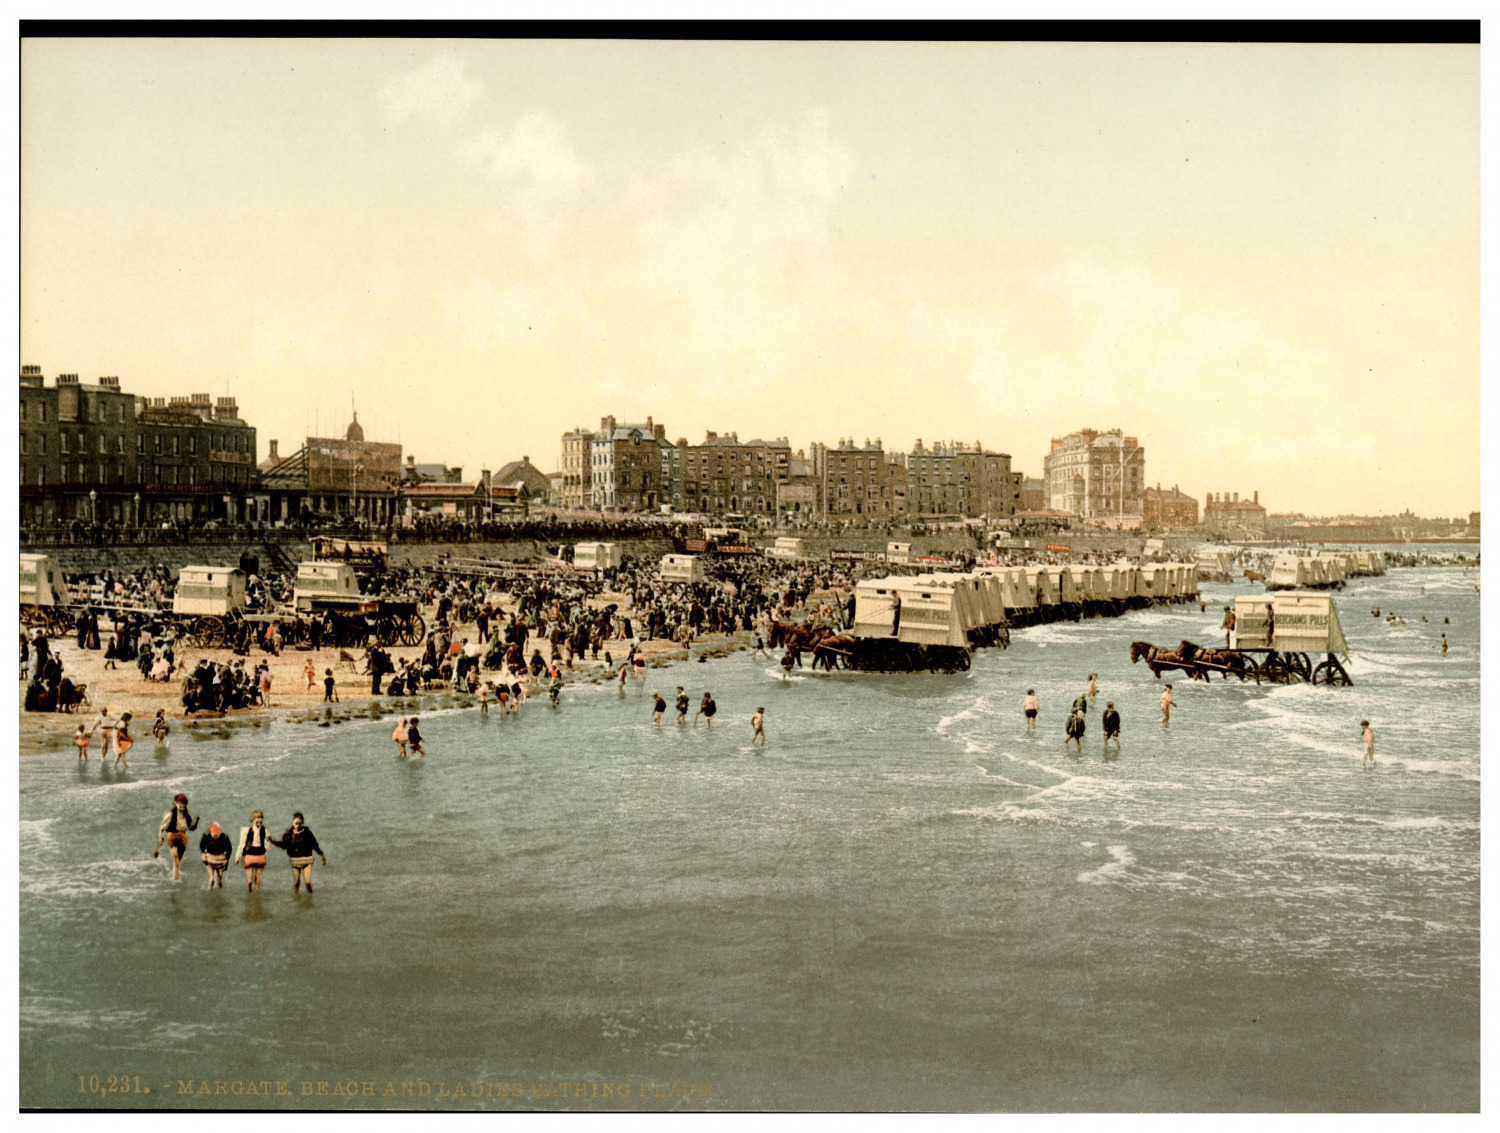 England. Margate. Beach and Ladies\' Bathing Place.  Vintage Photochrome by P.Z